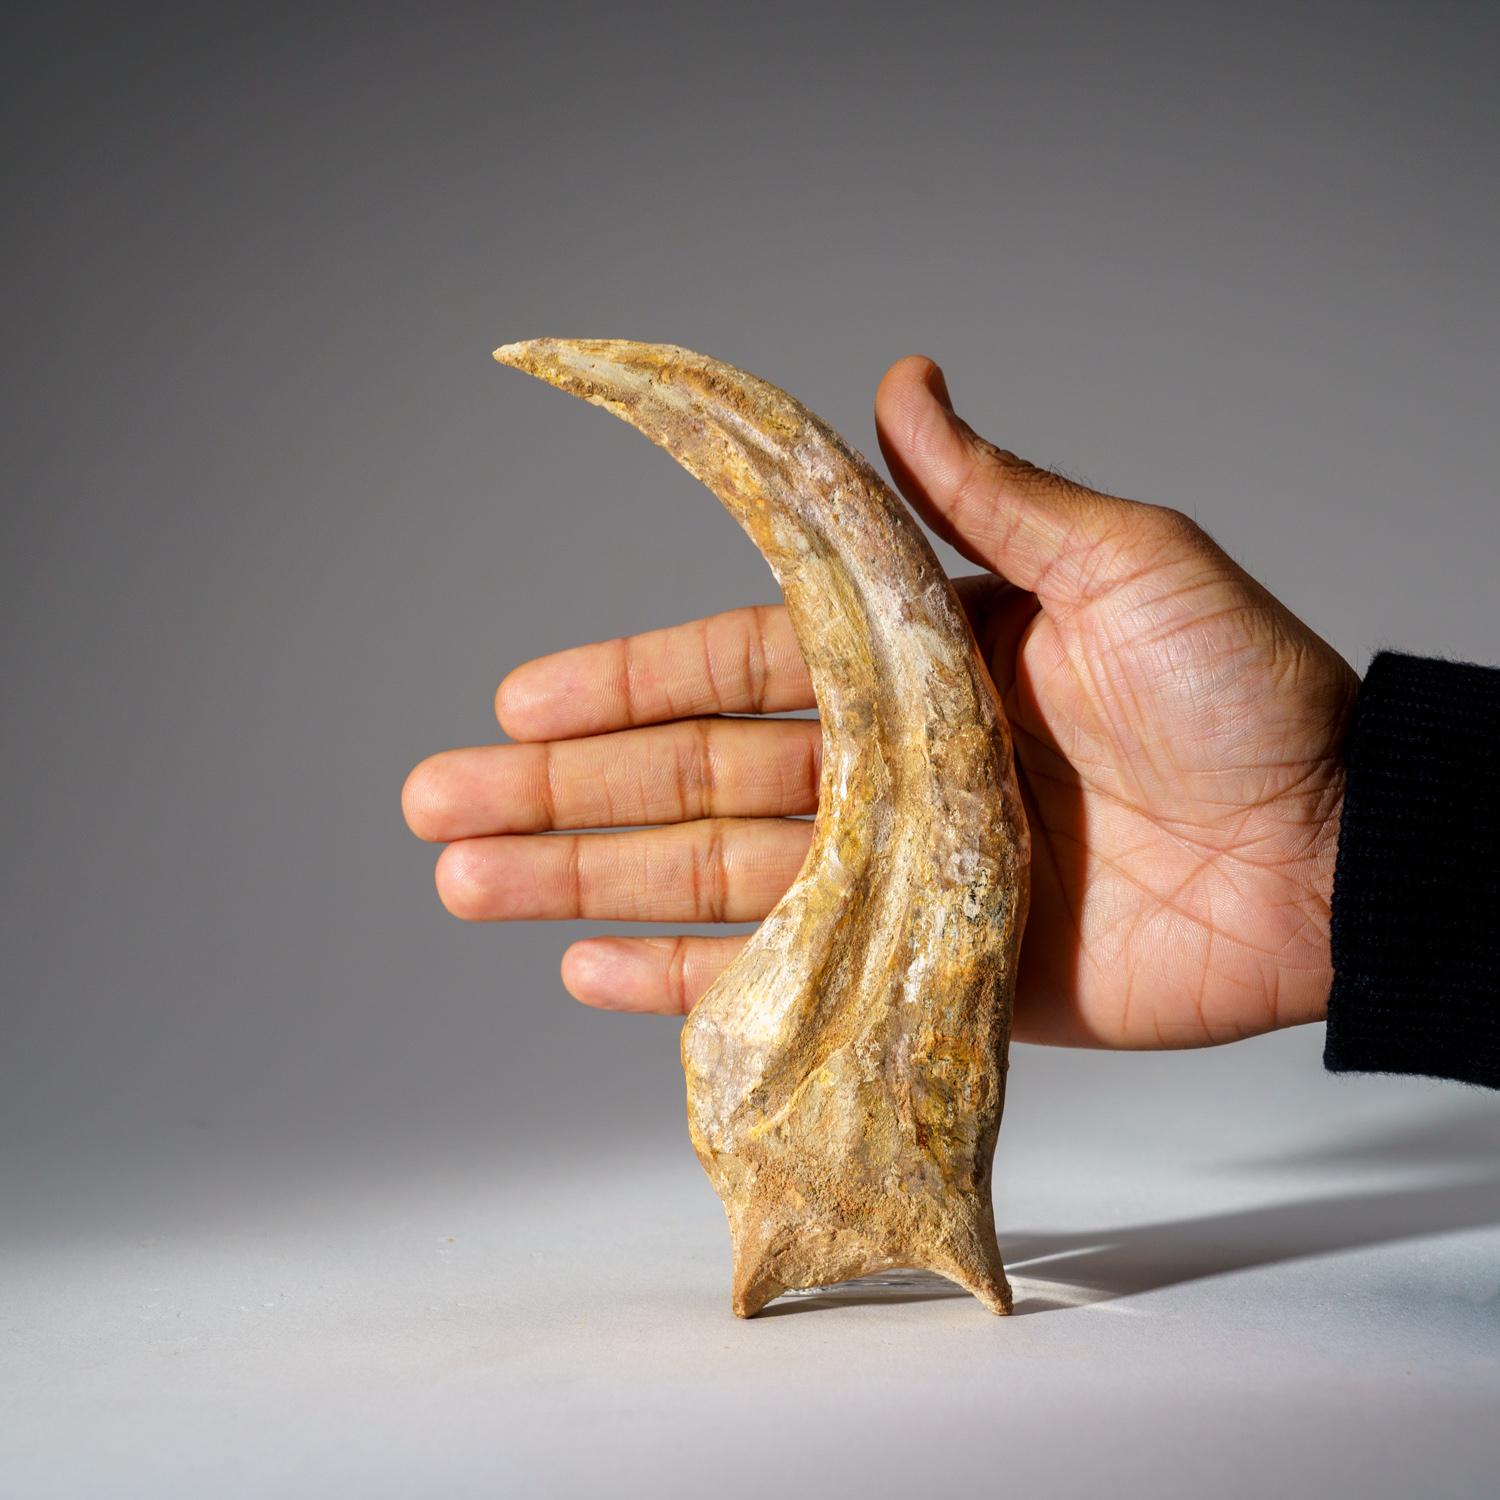 Egyptian Genuine Spinosaurus Claw in Display Case (190.5 grams)